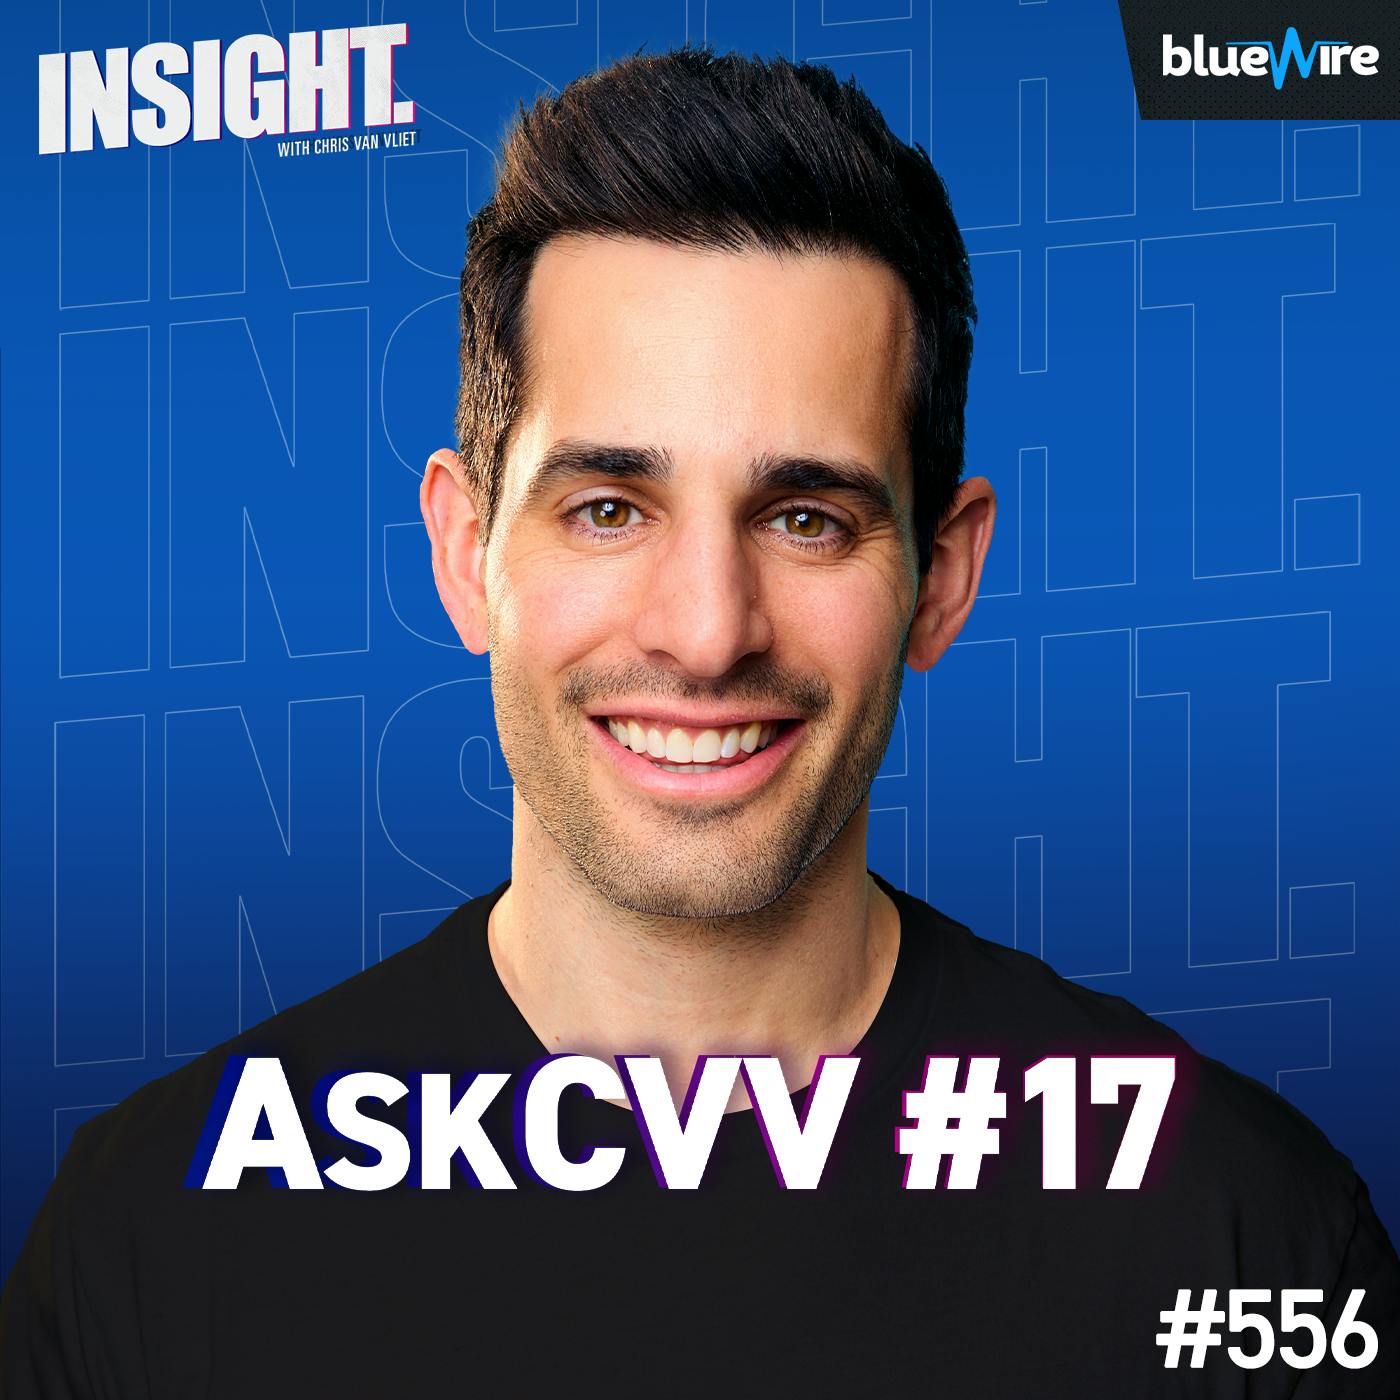 AskCVV #17 - Royal Rumble Picks, TNA Is Back, My Mount Rushmore, Tips For Starting A Podcast